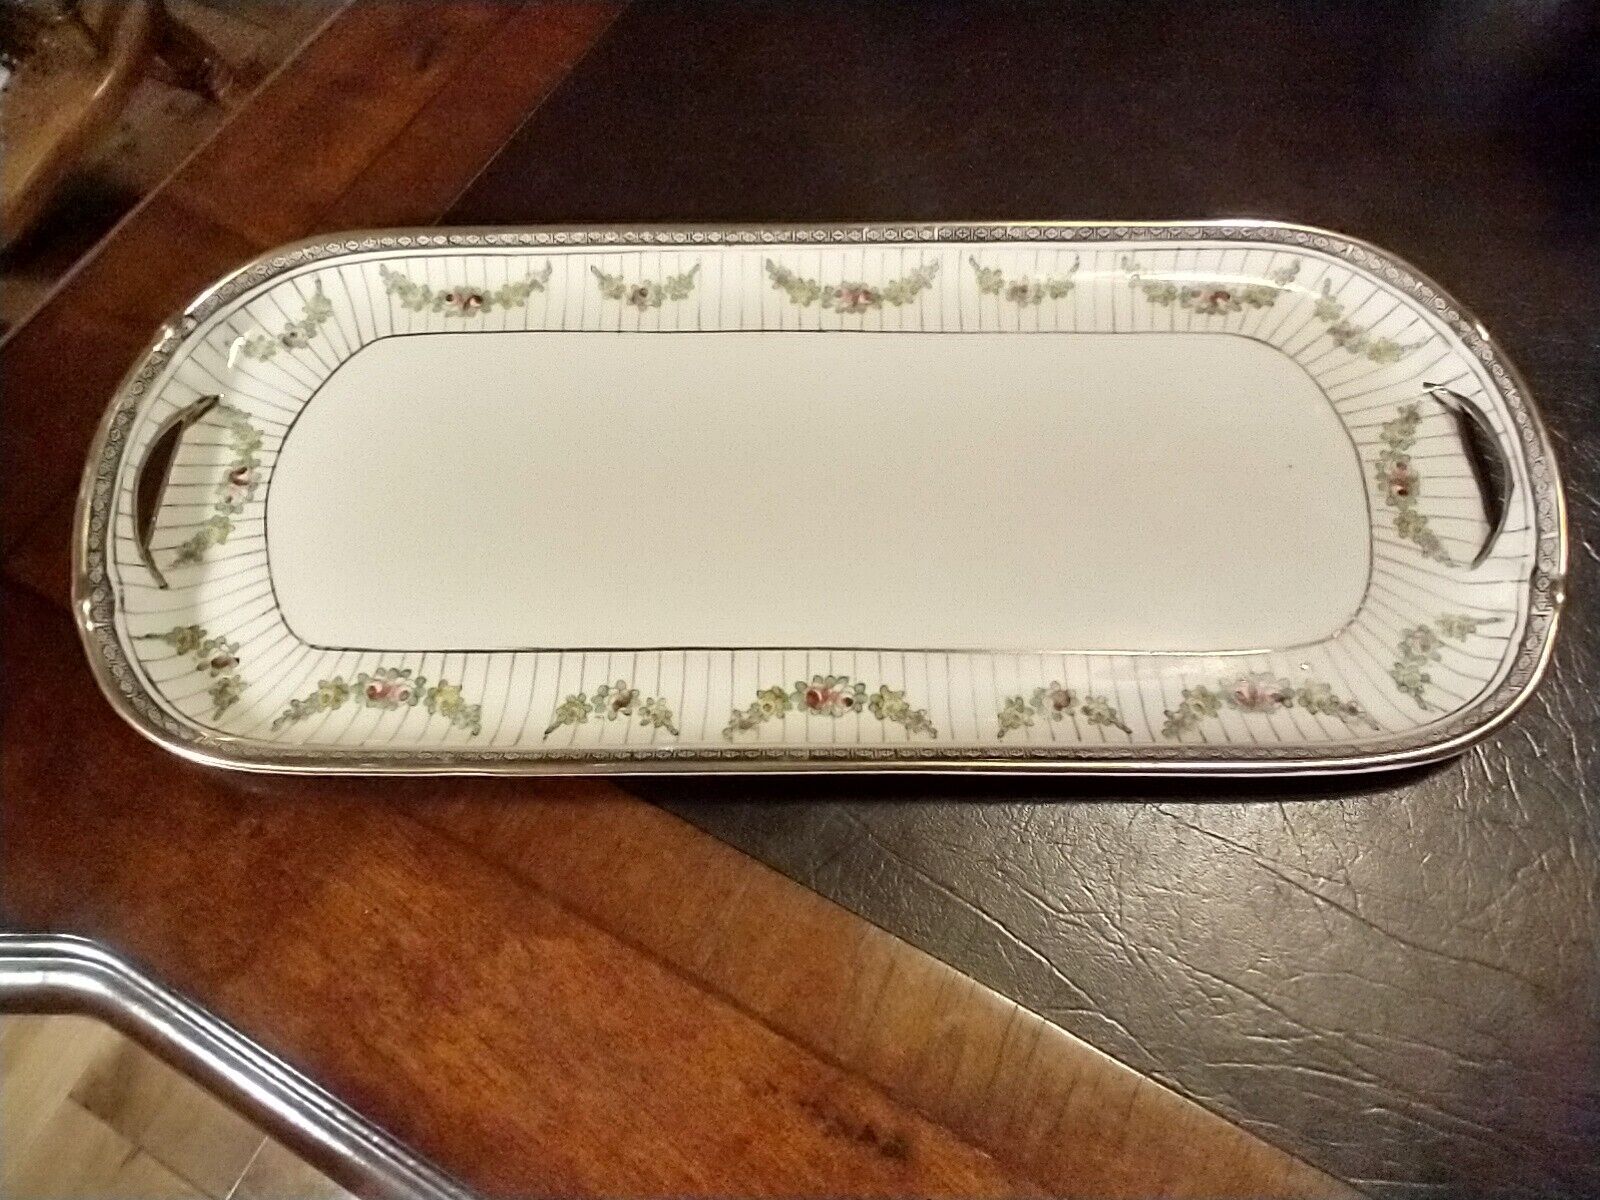 NIPPON Raised Gold Hand Painted Porcelain Serving Tray 14.25